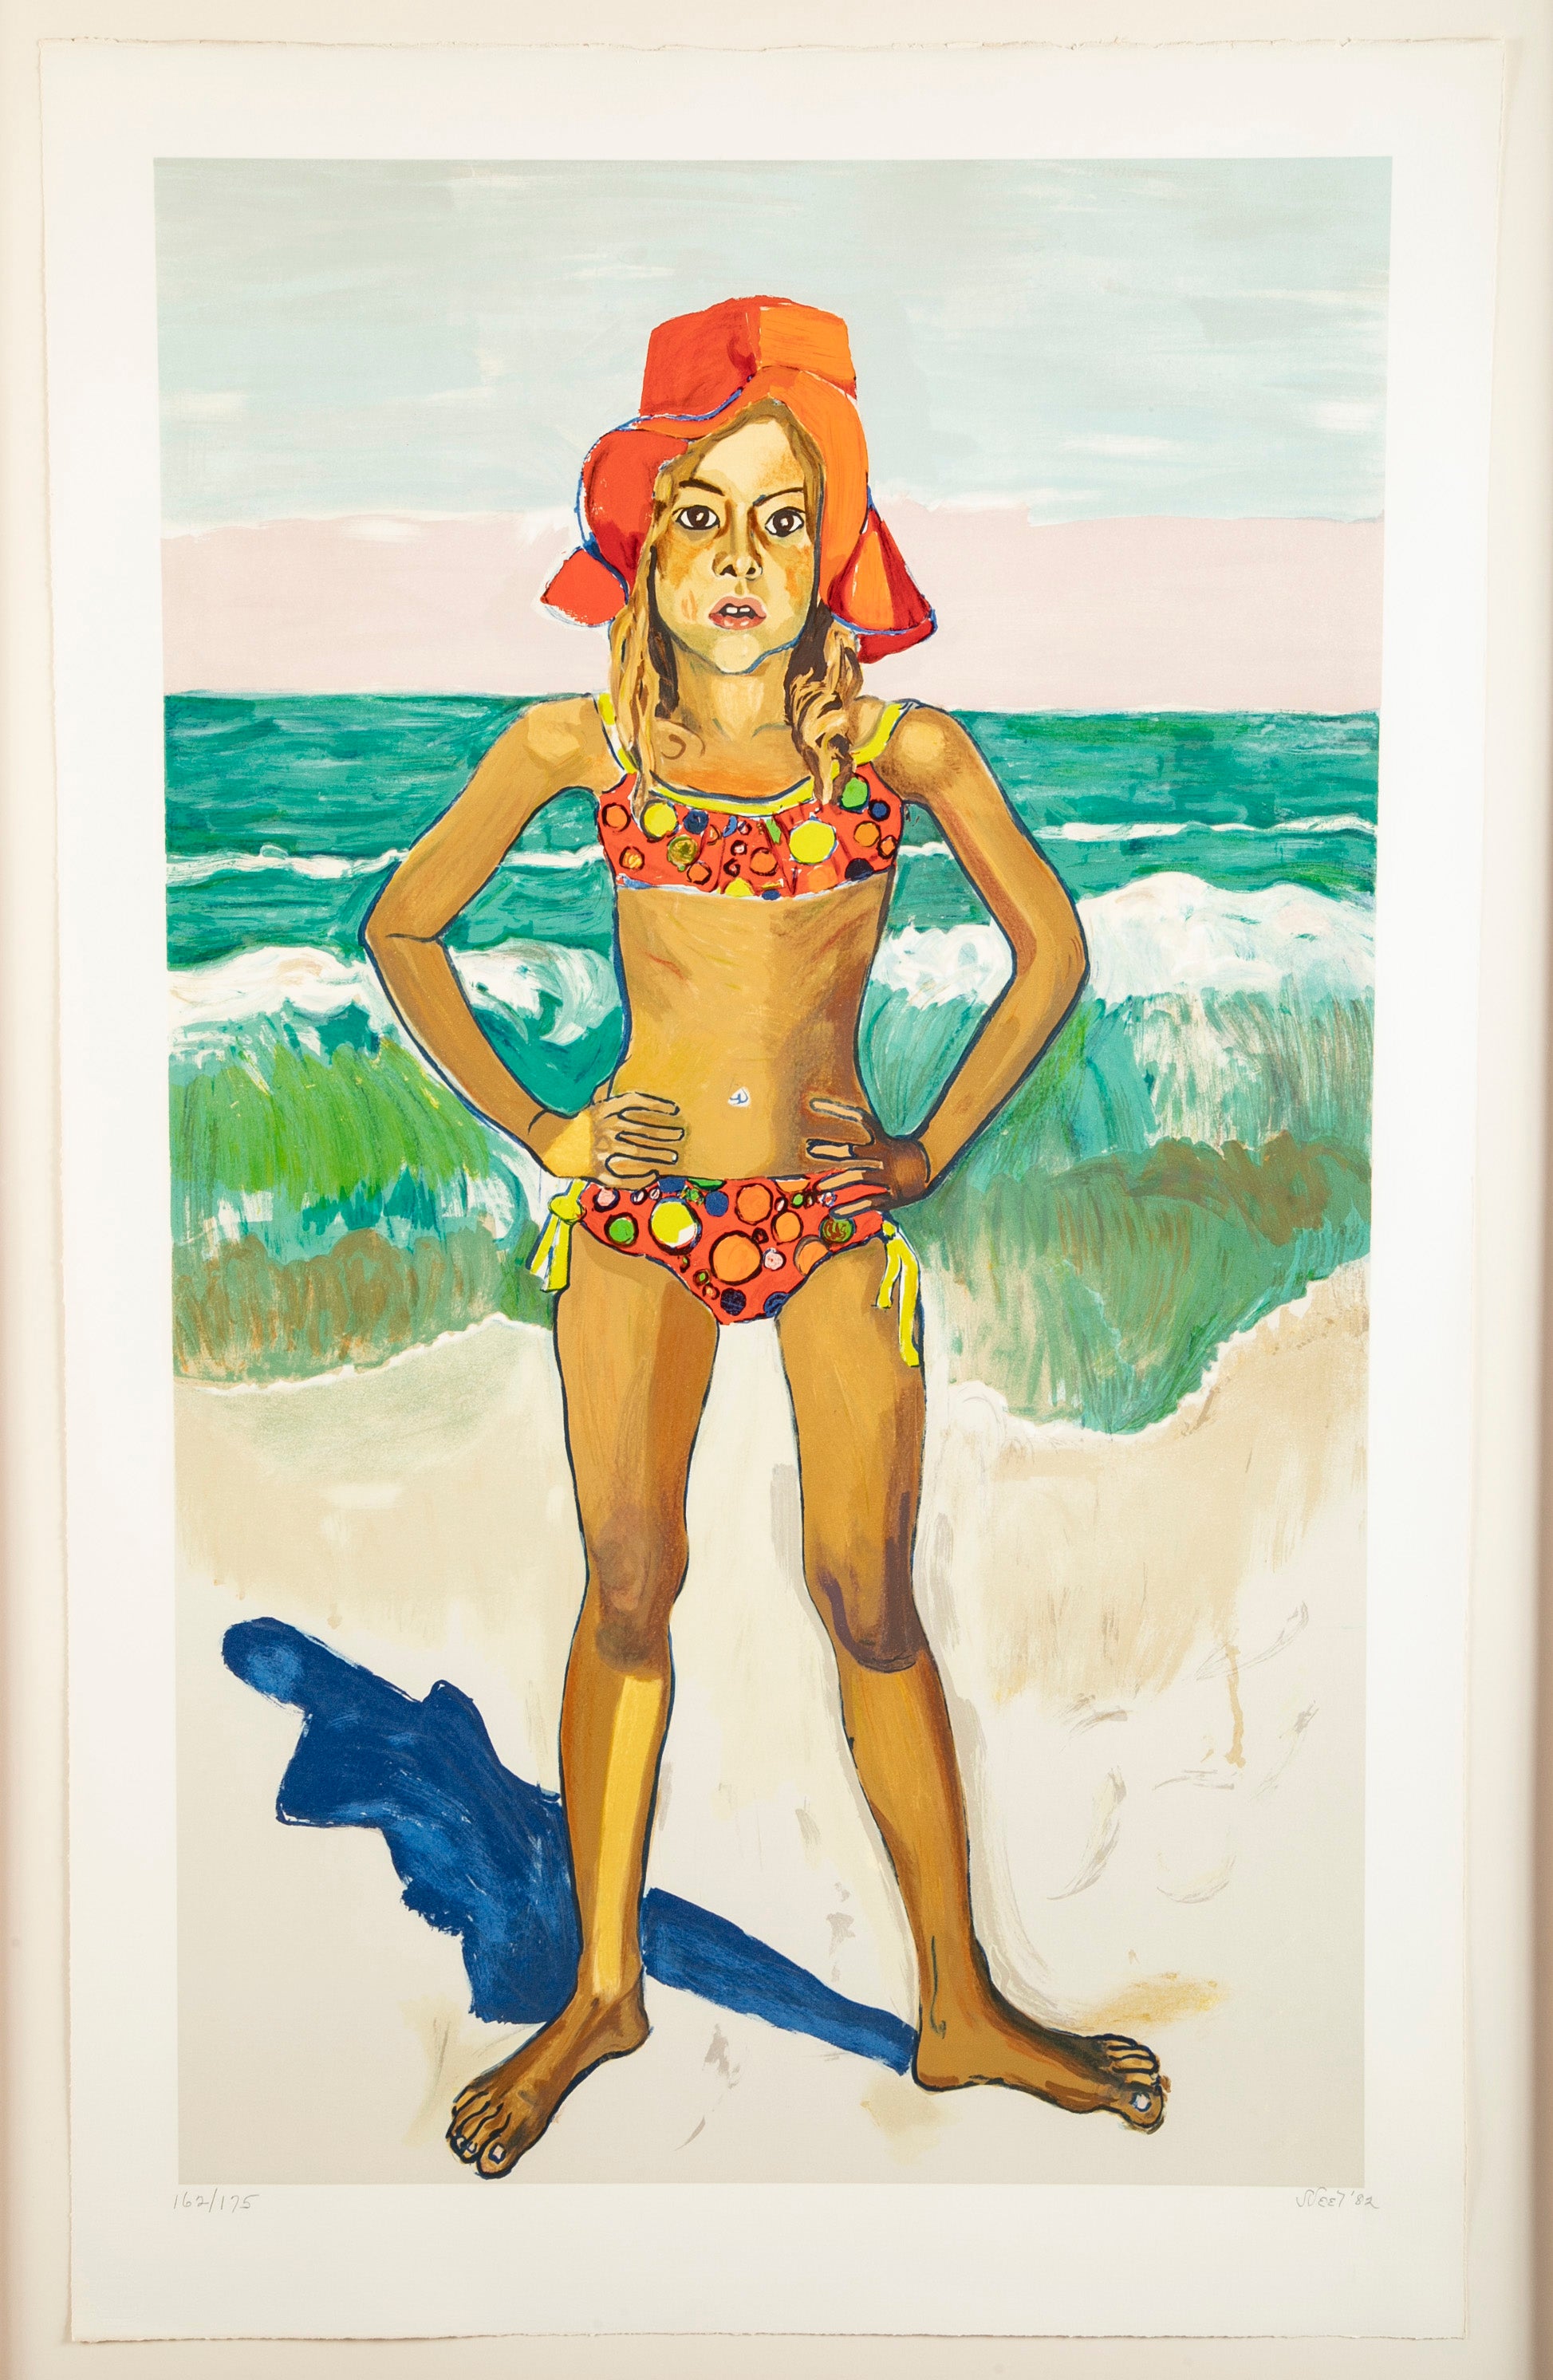 "Bather with Red Hat" by American Visual Portrait Artist Alice Neel